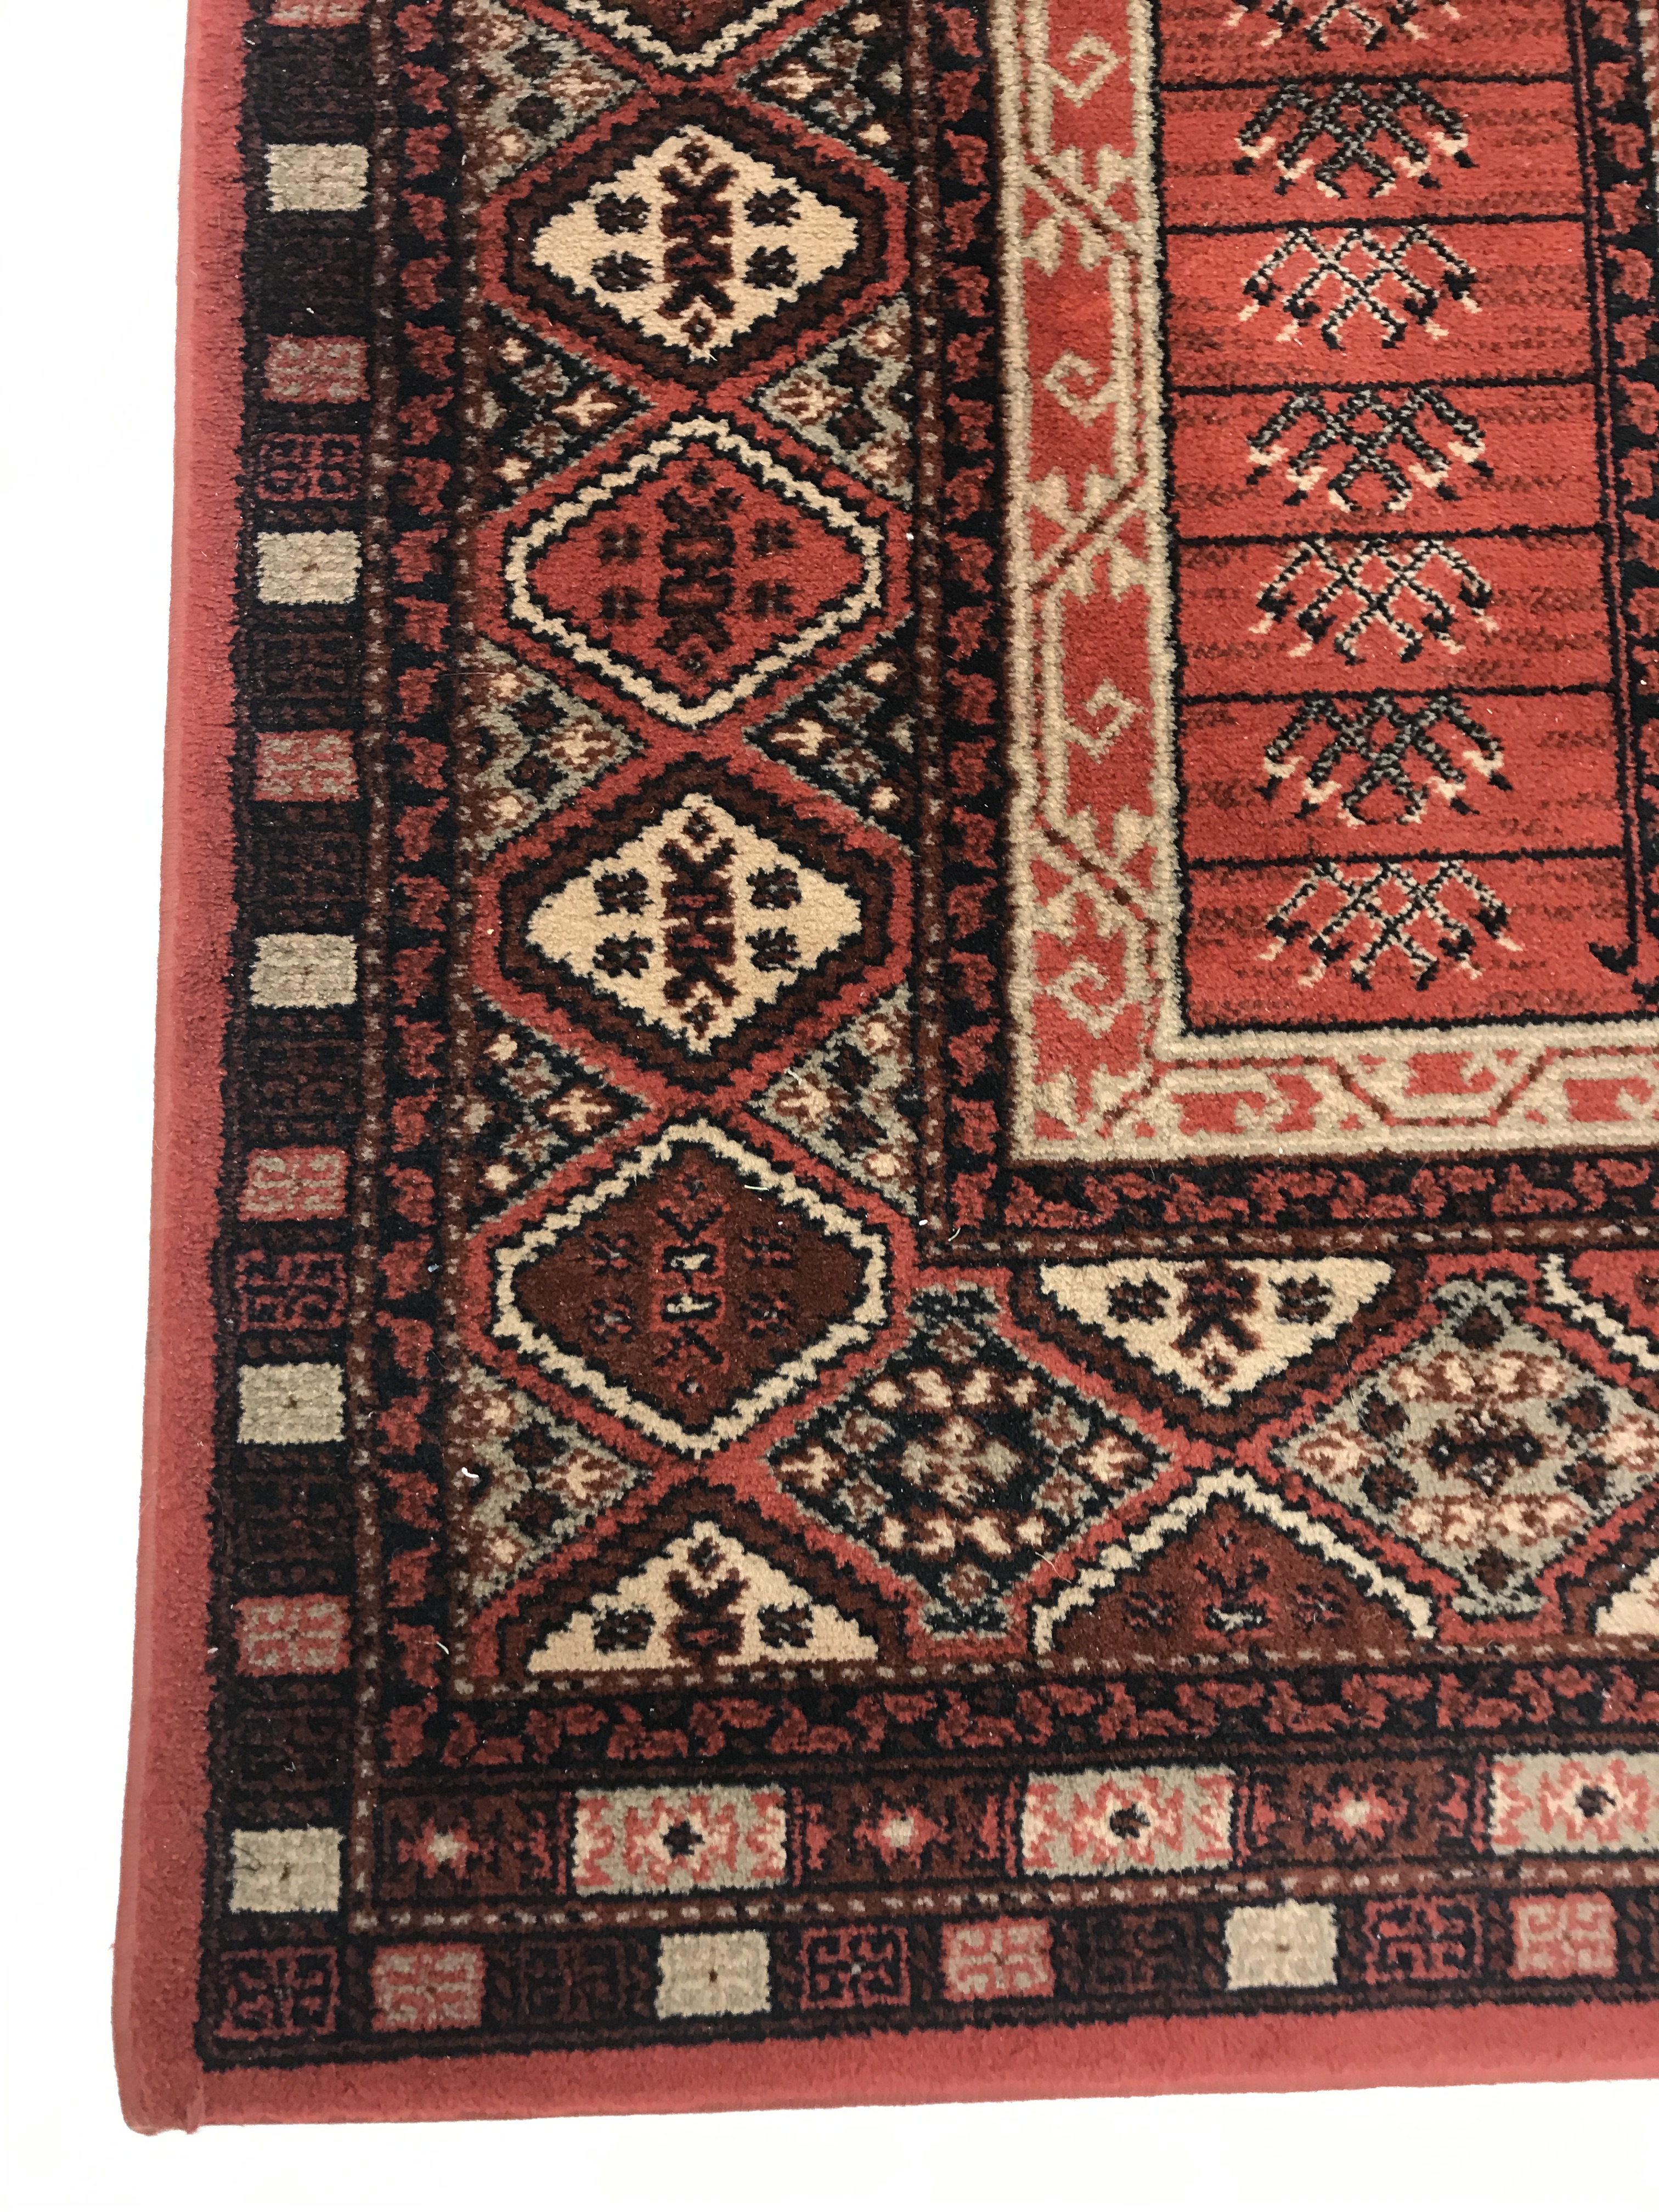 Persian design red ground rug, repeating border, 190cm x 137cm - Image 5 of 6